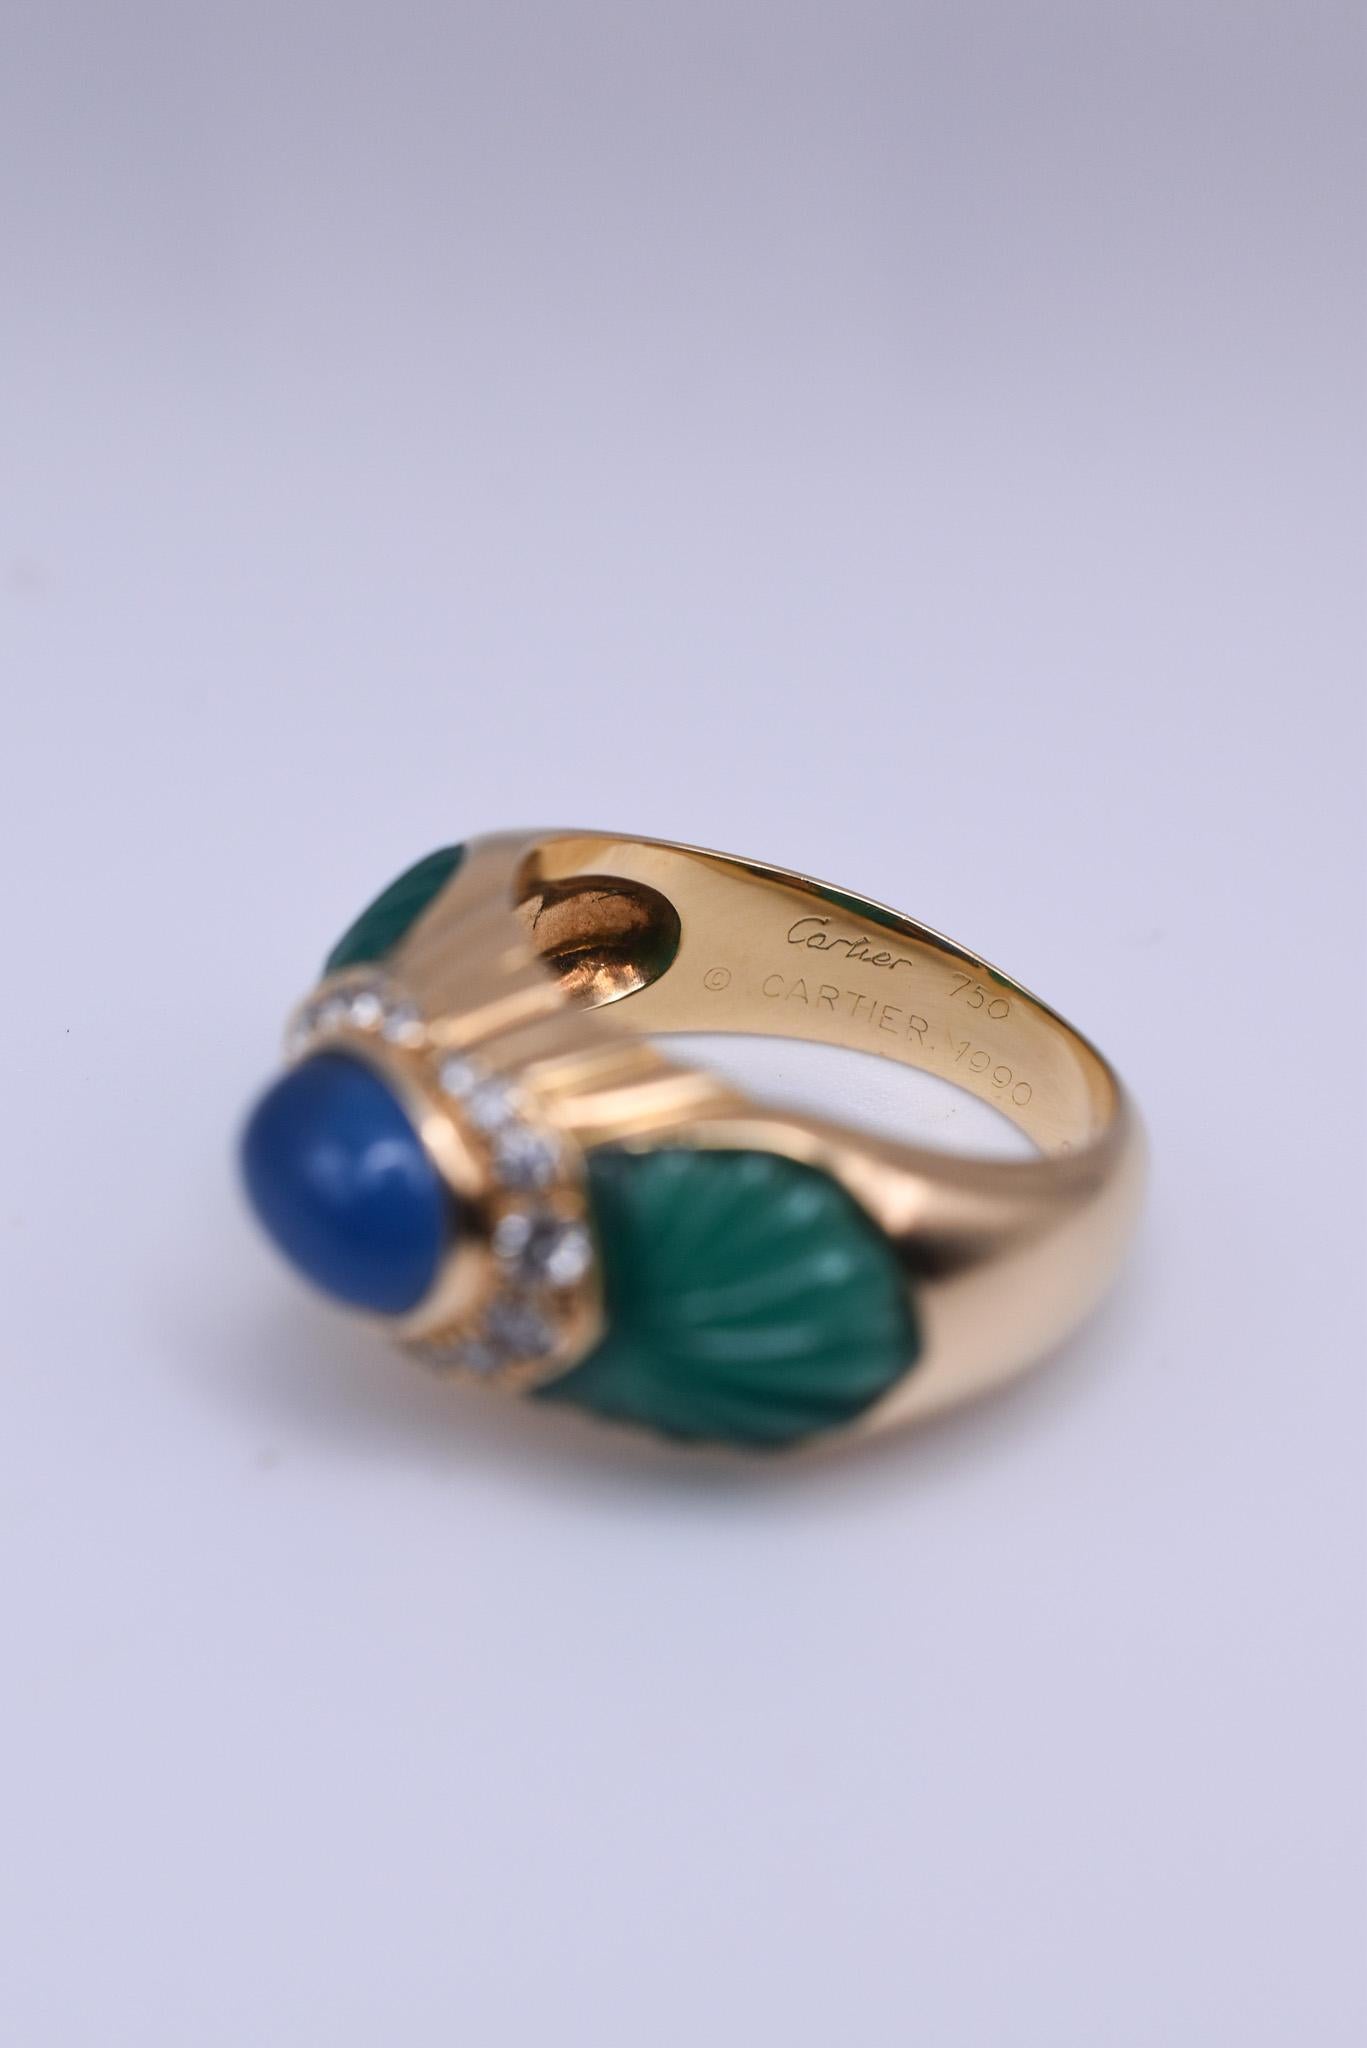 Women's or Men's Vintage Cartier 18k Gold Sapphire, Chrysoprase and Diamond Ring, c. 1980 For Sale